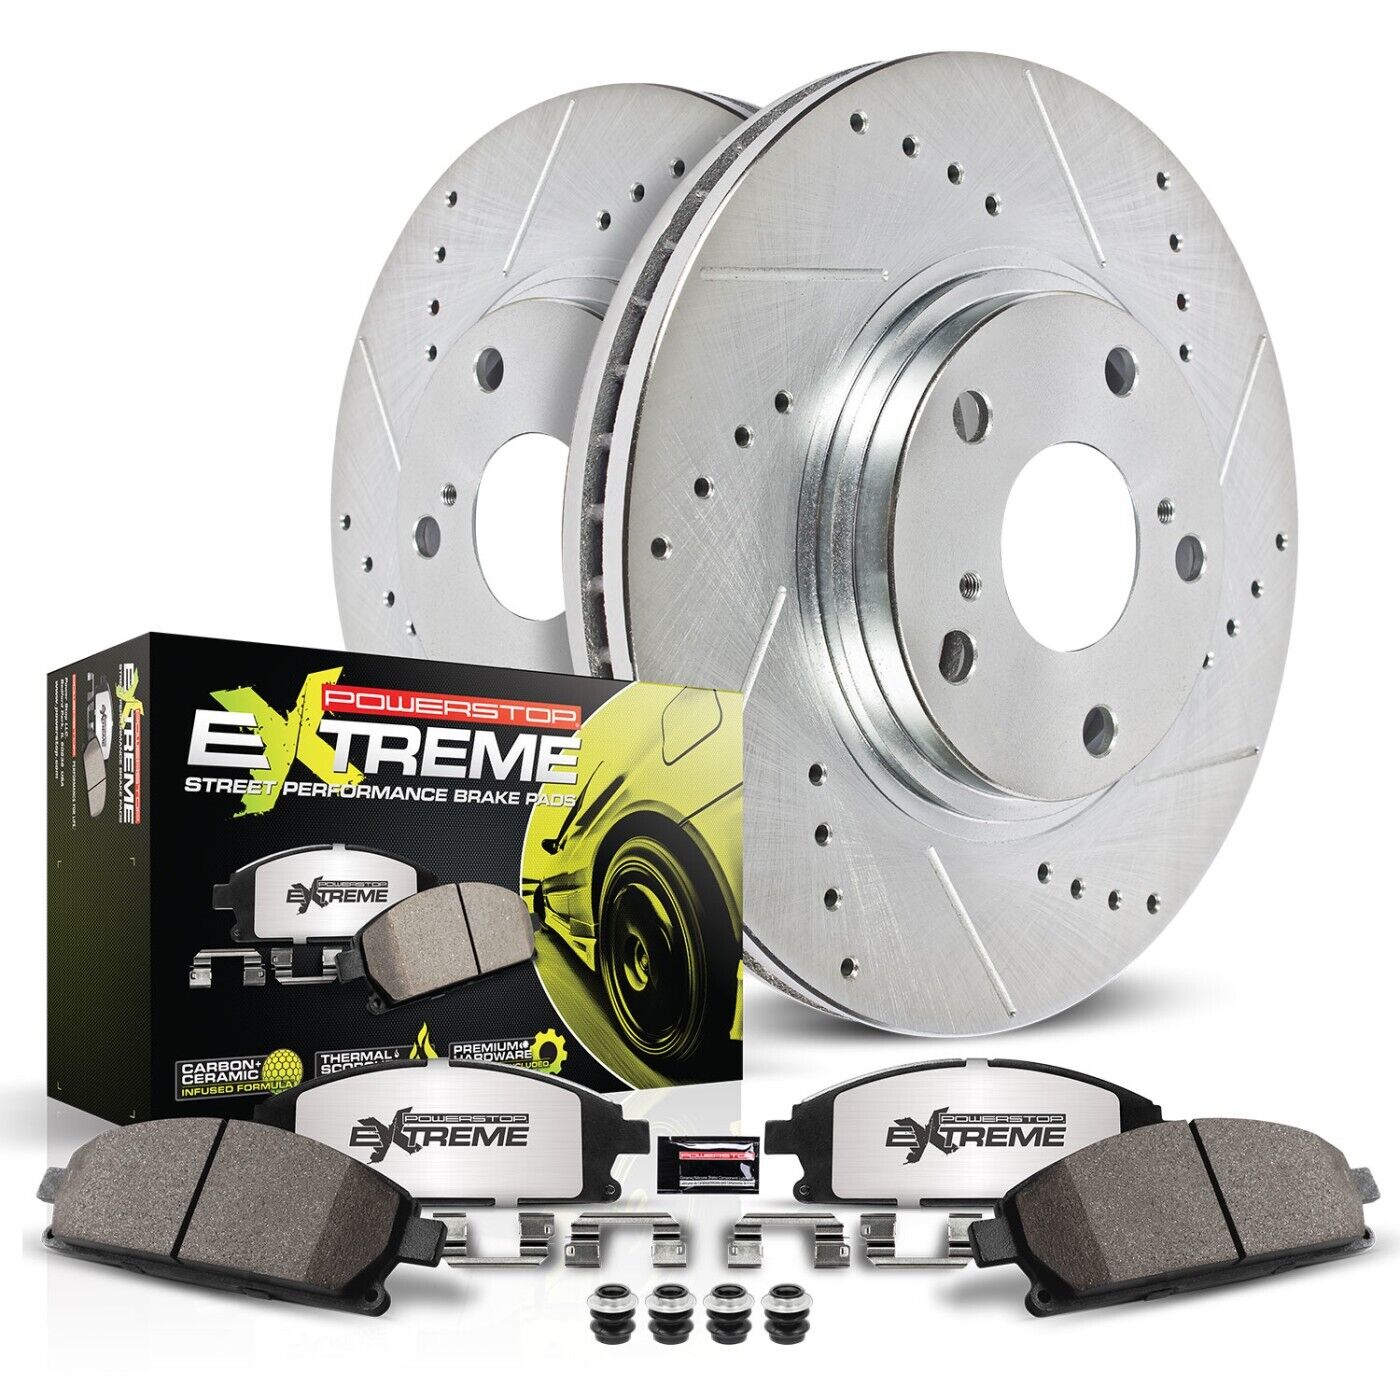 Powerstop K2908-26 Brake Discs And Pad Kit 2-Wheel Set Front for Chevy Olds